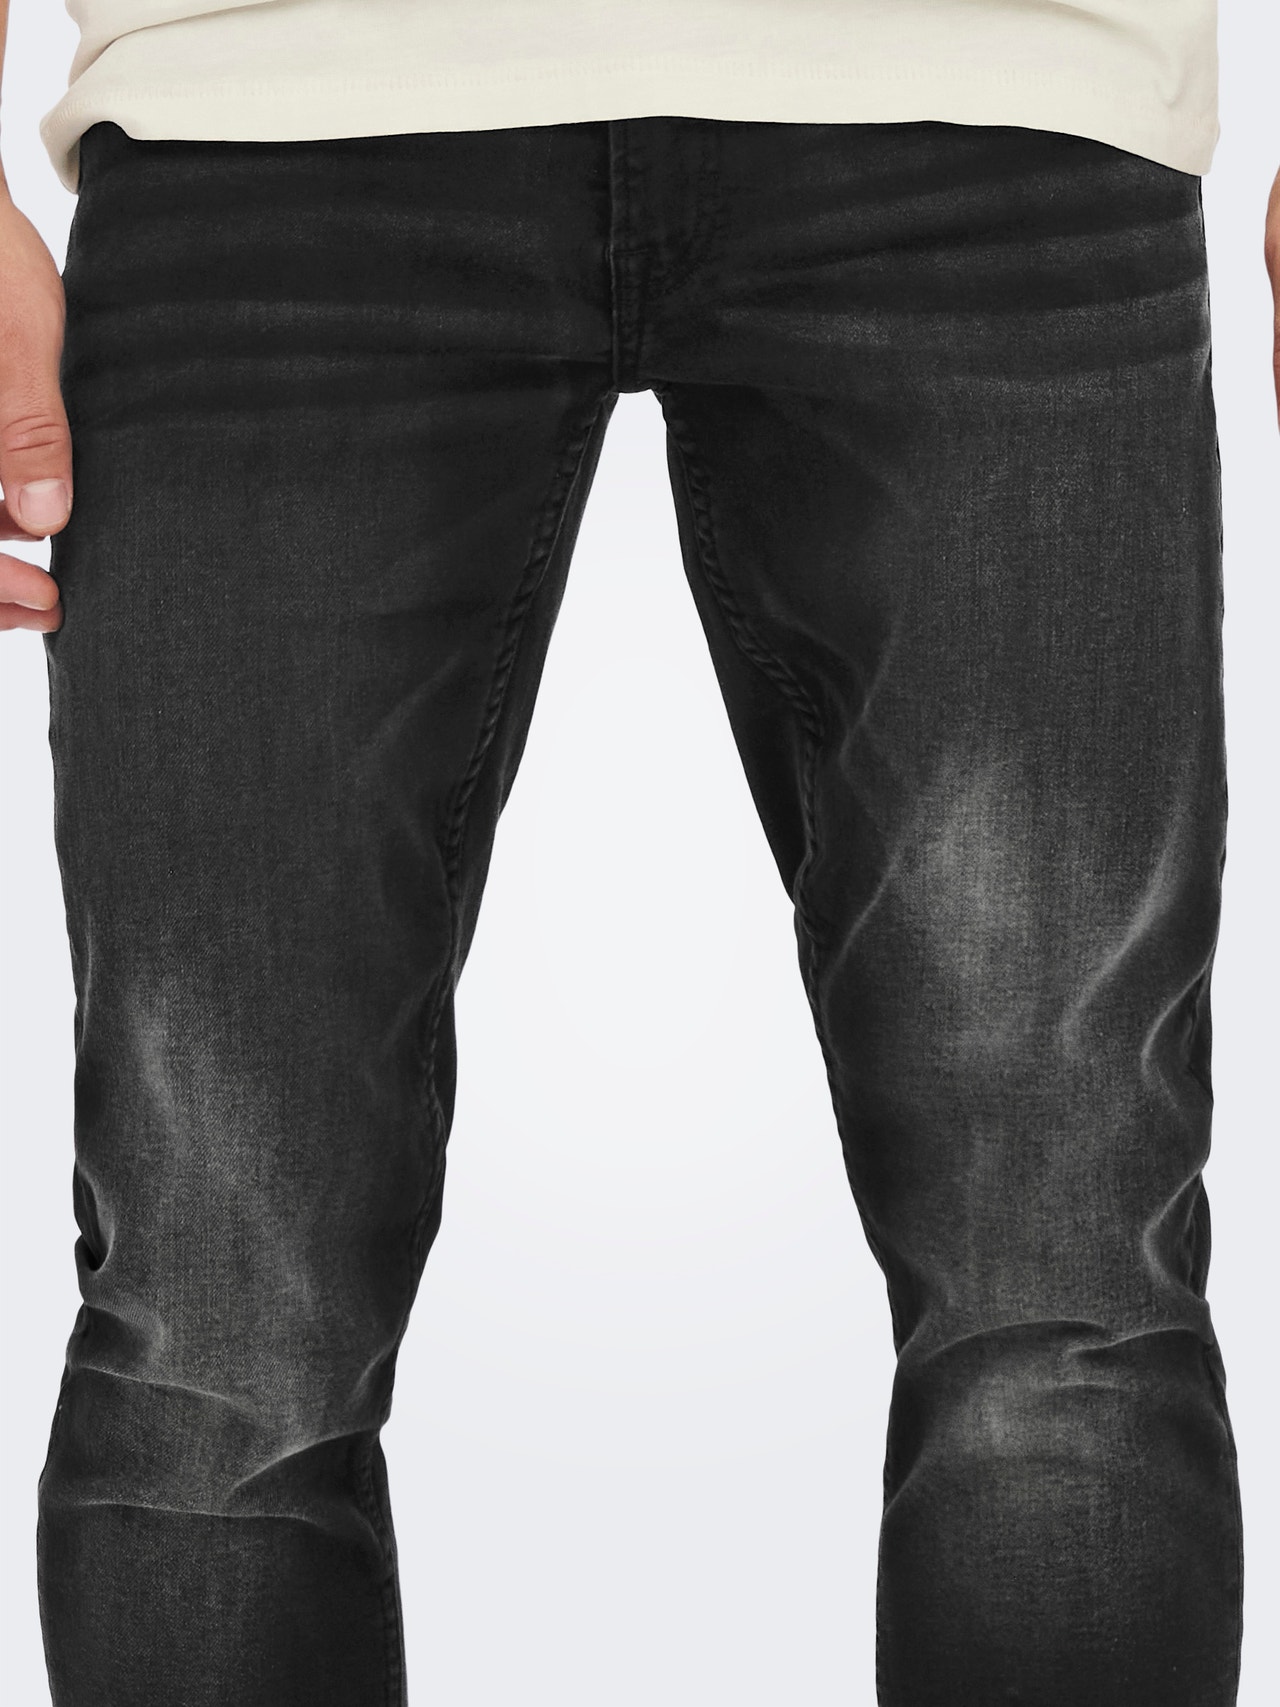 ONLY & SONS Jeans Slim Fit Taille moyenne -Black Denim - 22023231